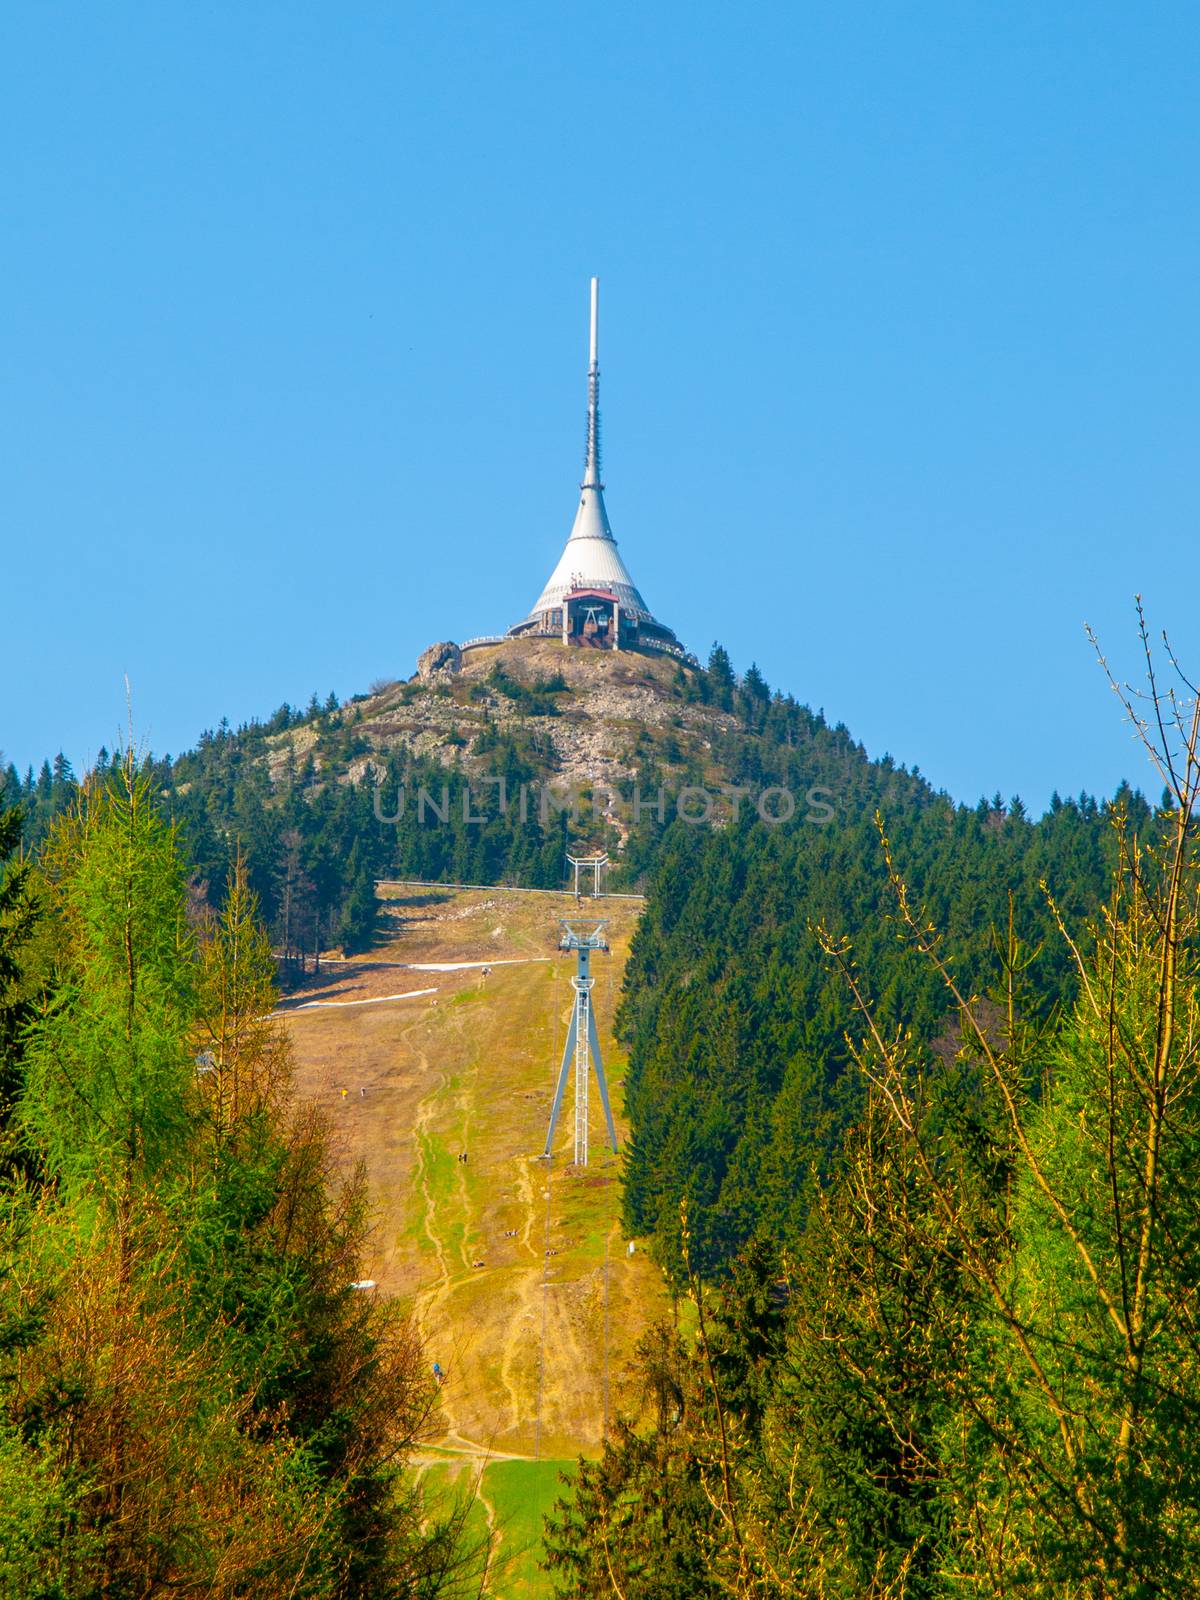 Jested - unique architectural building. Hotel and TV transmitter on the top of Jested Mountain, Liberec, Czech Republic by pyty